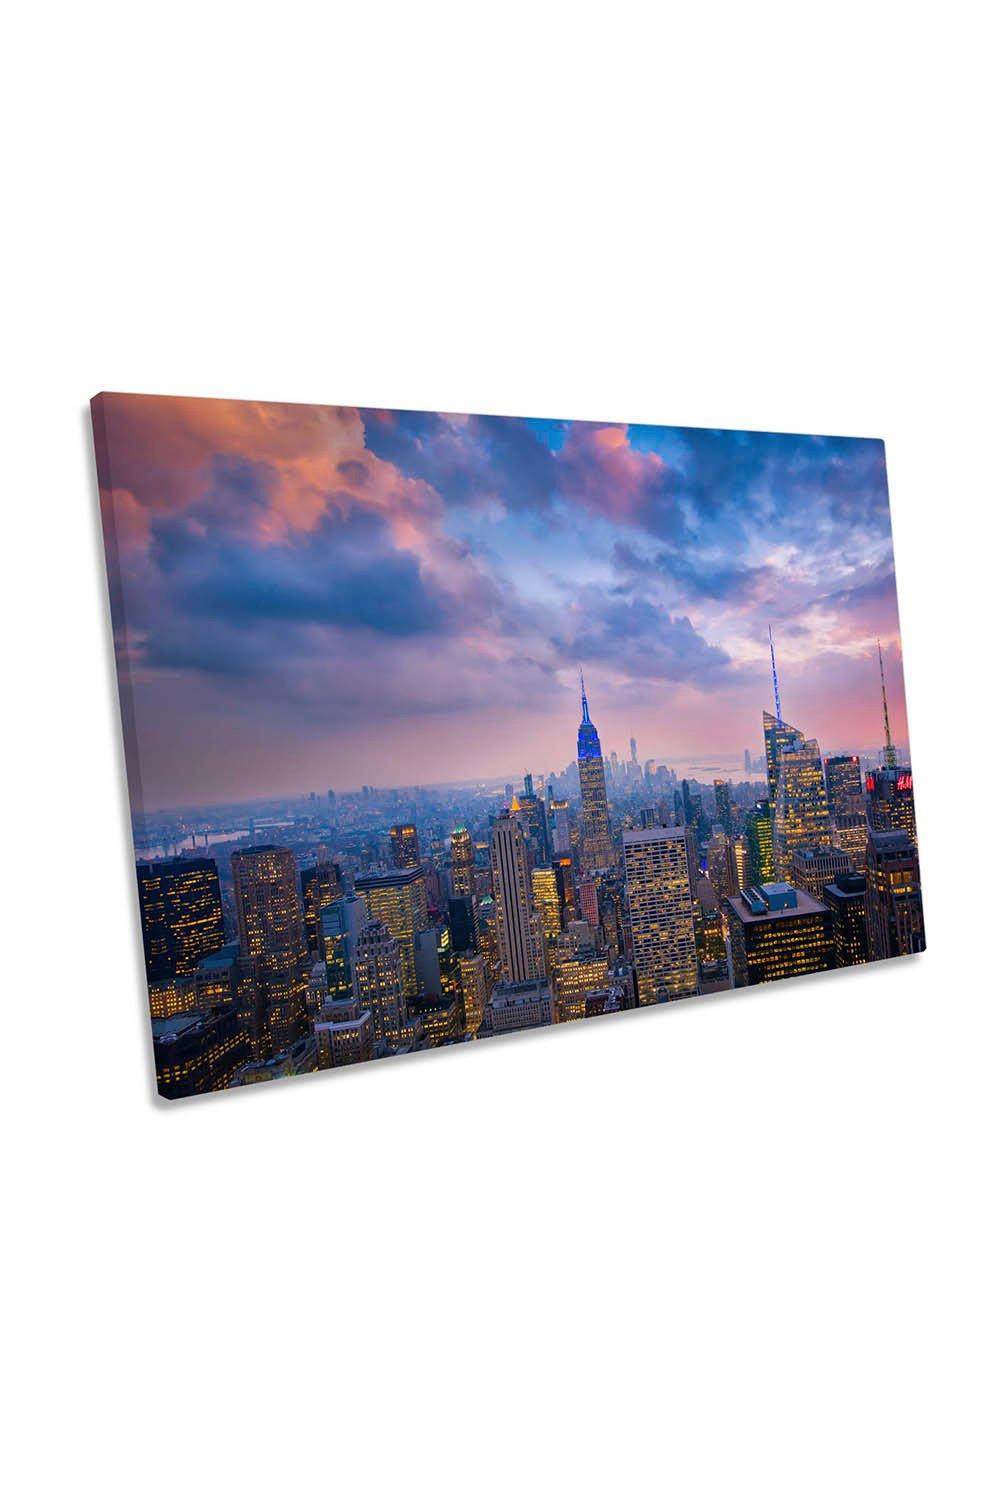 Top of the Rock New York City Skyline Blue Canvas Wall Art Picture Print